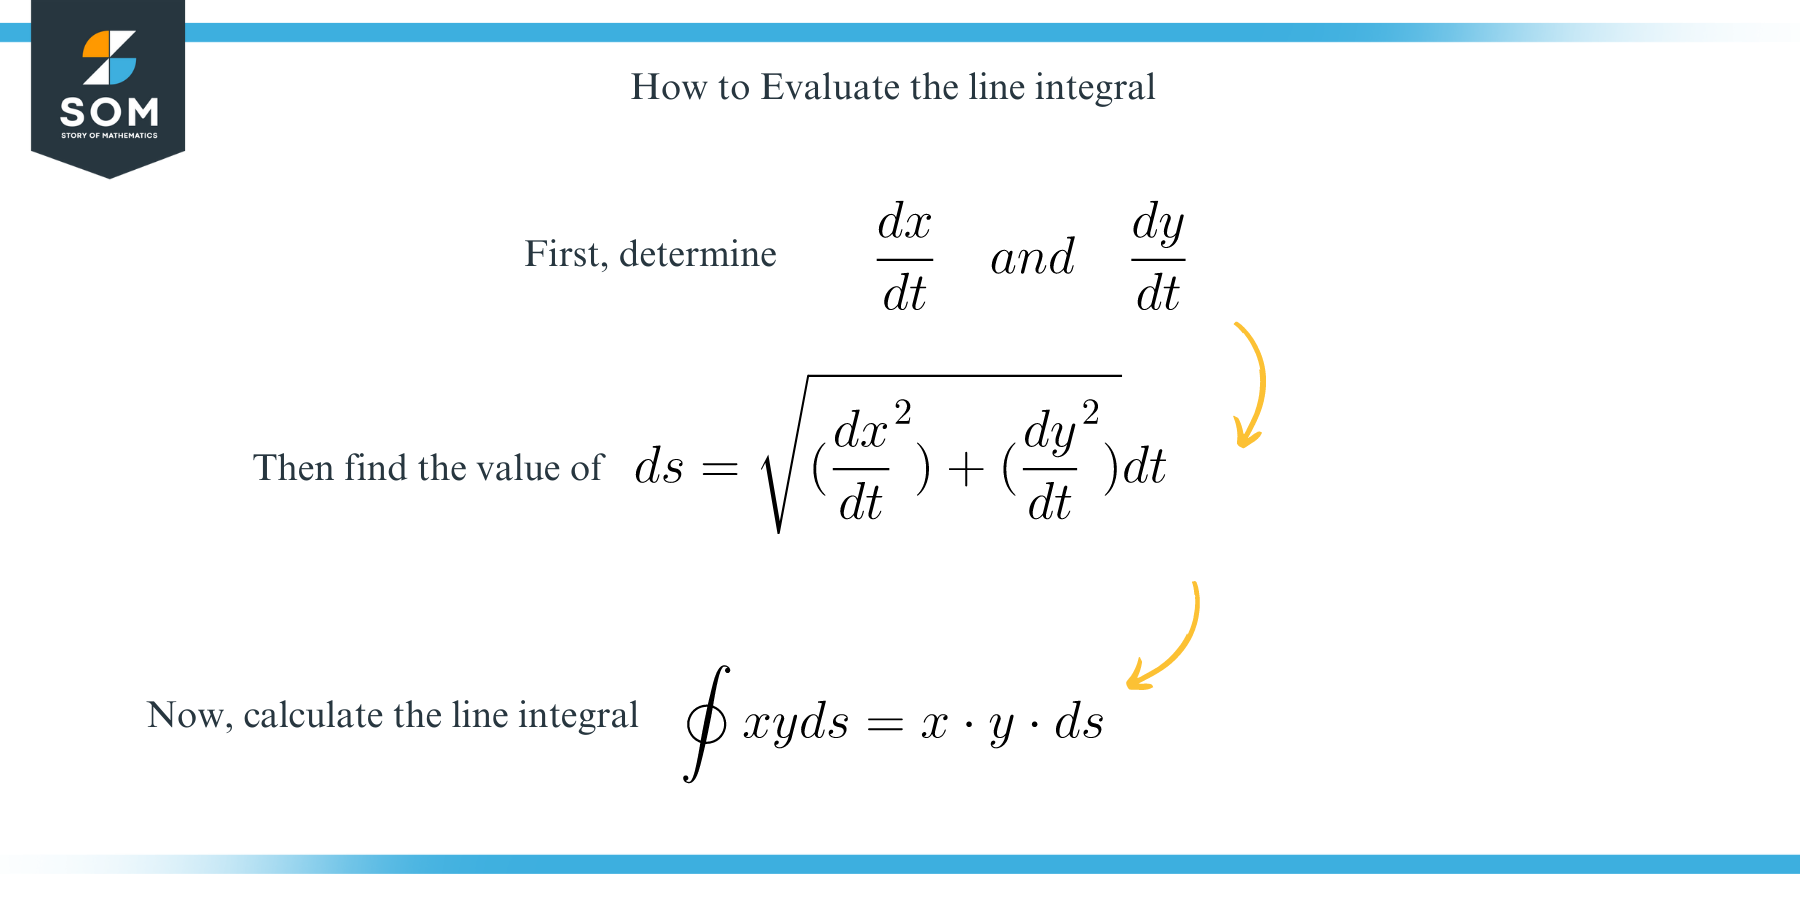 Evaluate The line Integral step by step